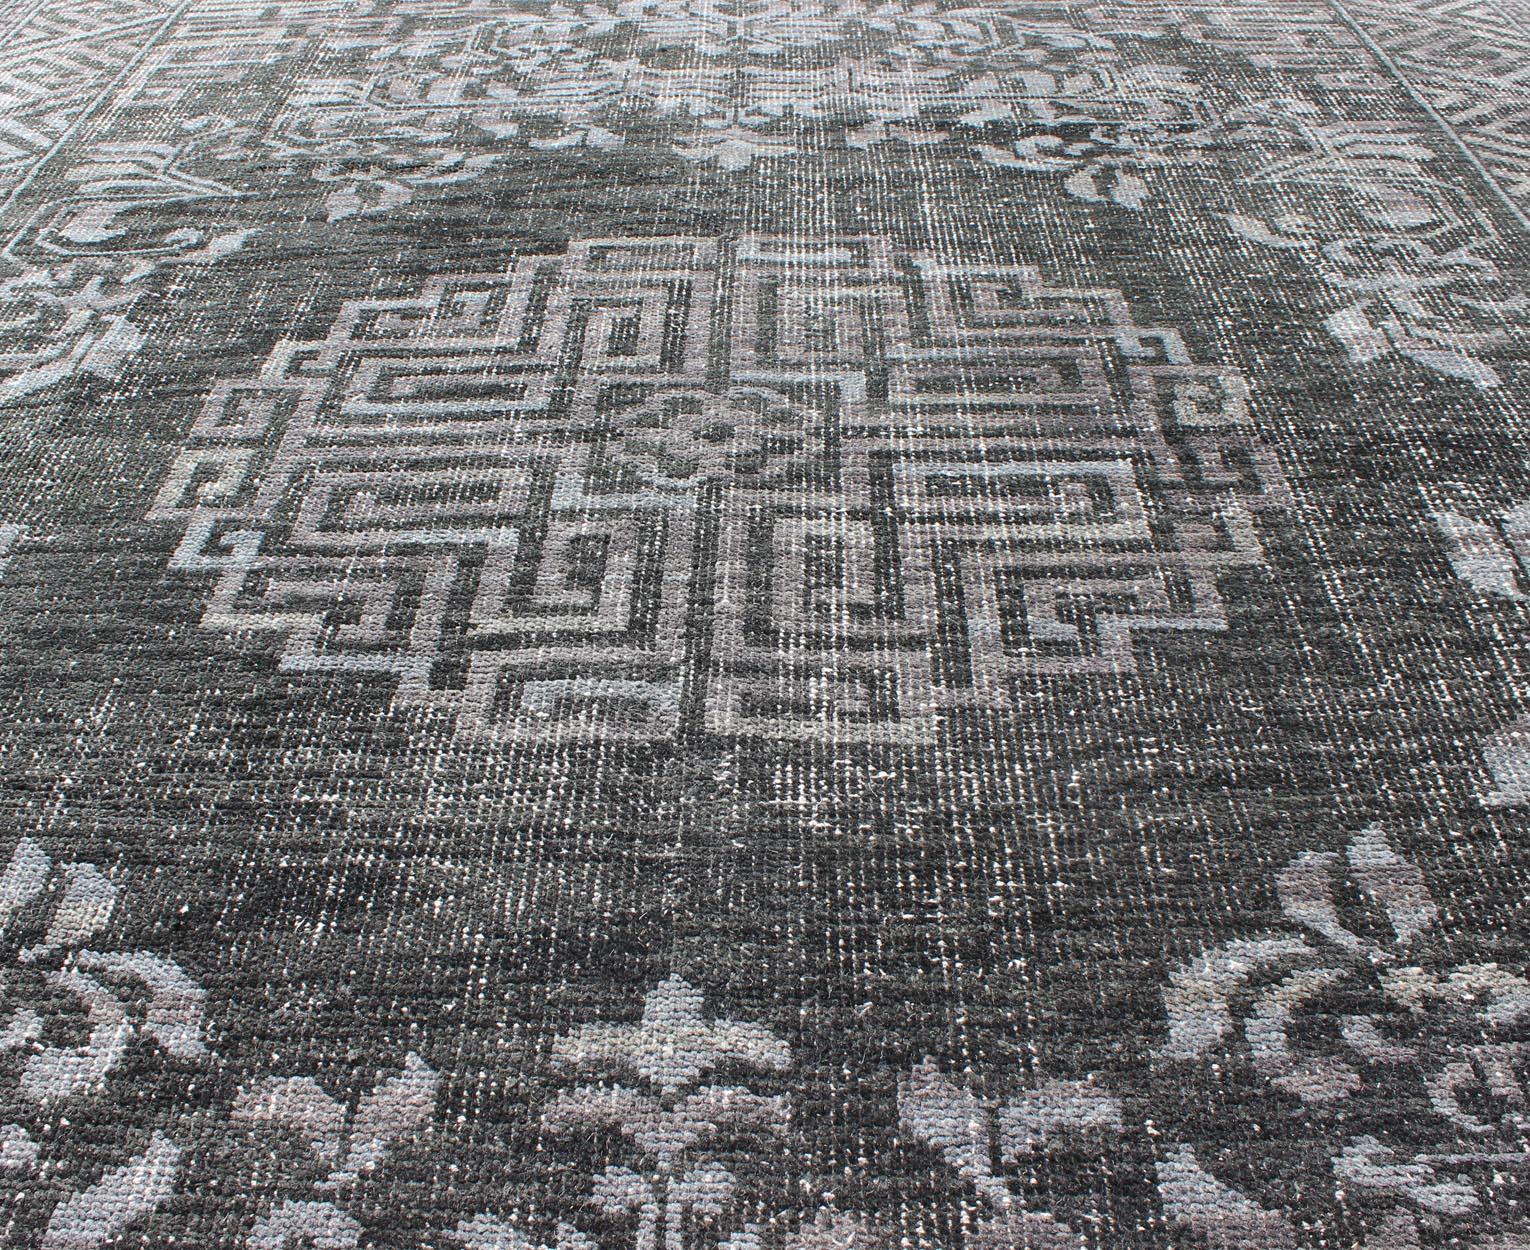 Keivan Woven Arts Modern Khotan Hand Knotted Wool Rug in Charcoal & Gray. This modern Khotan rug has been hand-knotted features an all-over, sub-geometric late central medallion design rendered in charcoal and gray tones. A complementary border